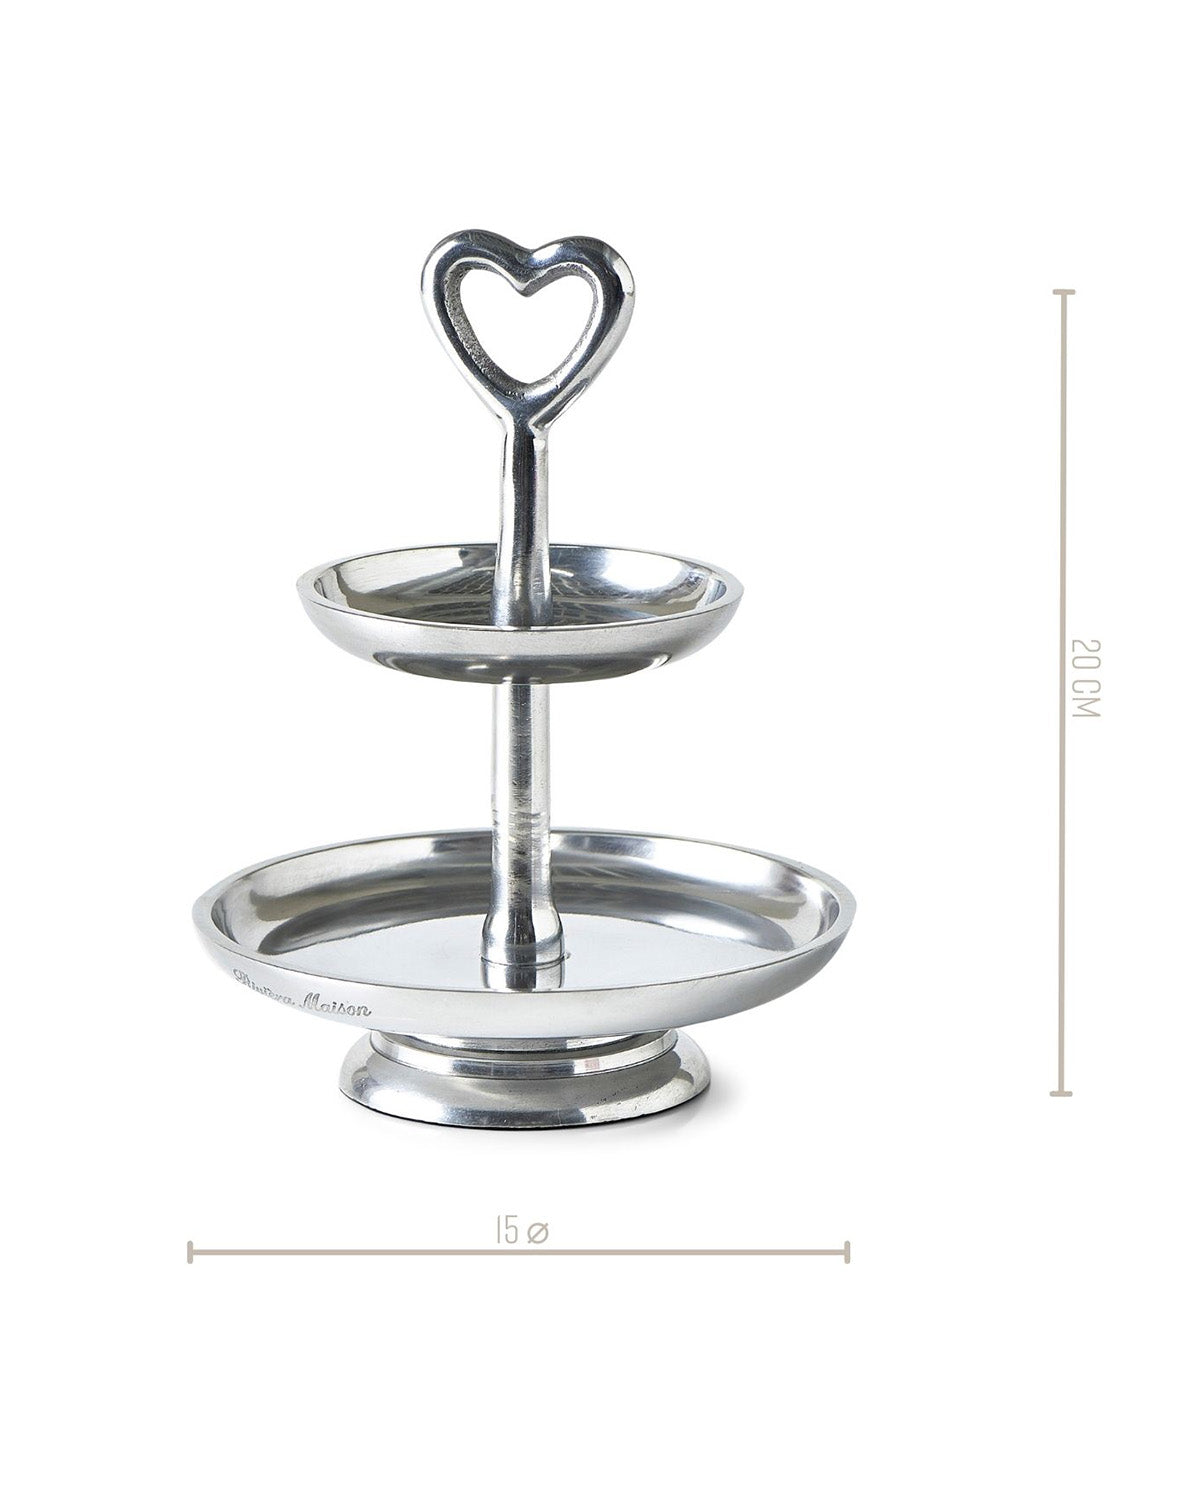 ETAGÈRE glossy aluminum heart-shaped carrier ring by Riviera Maison